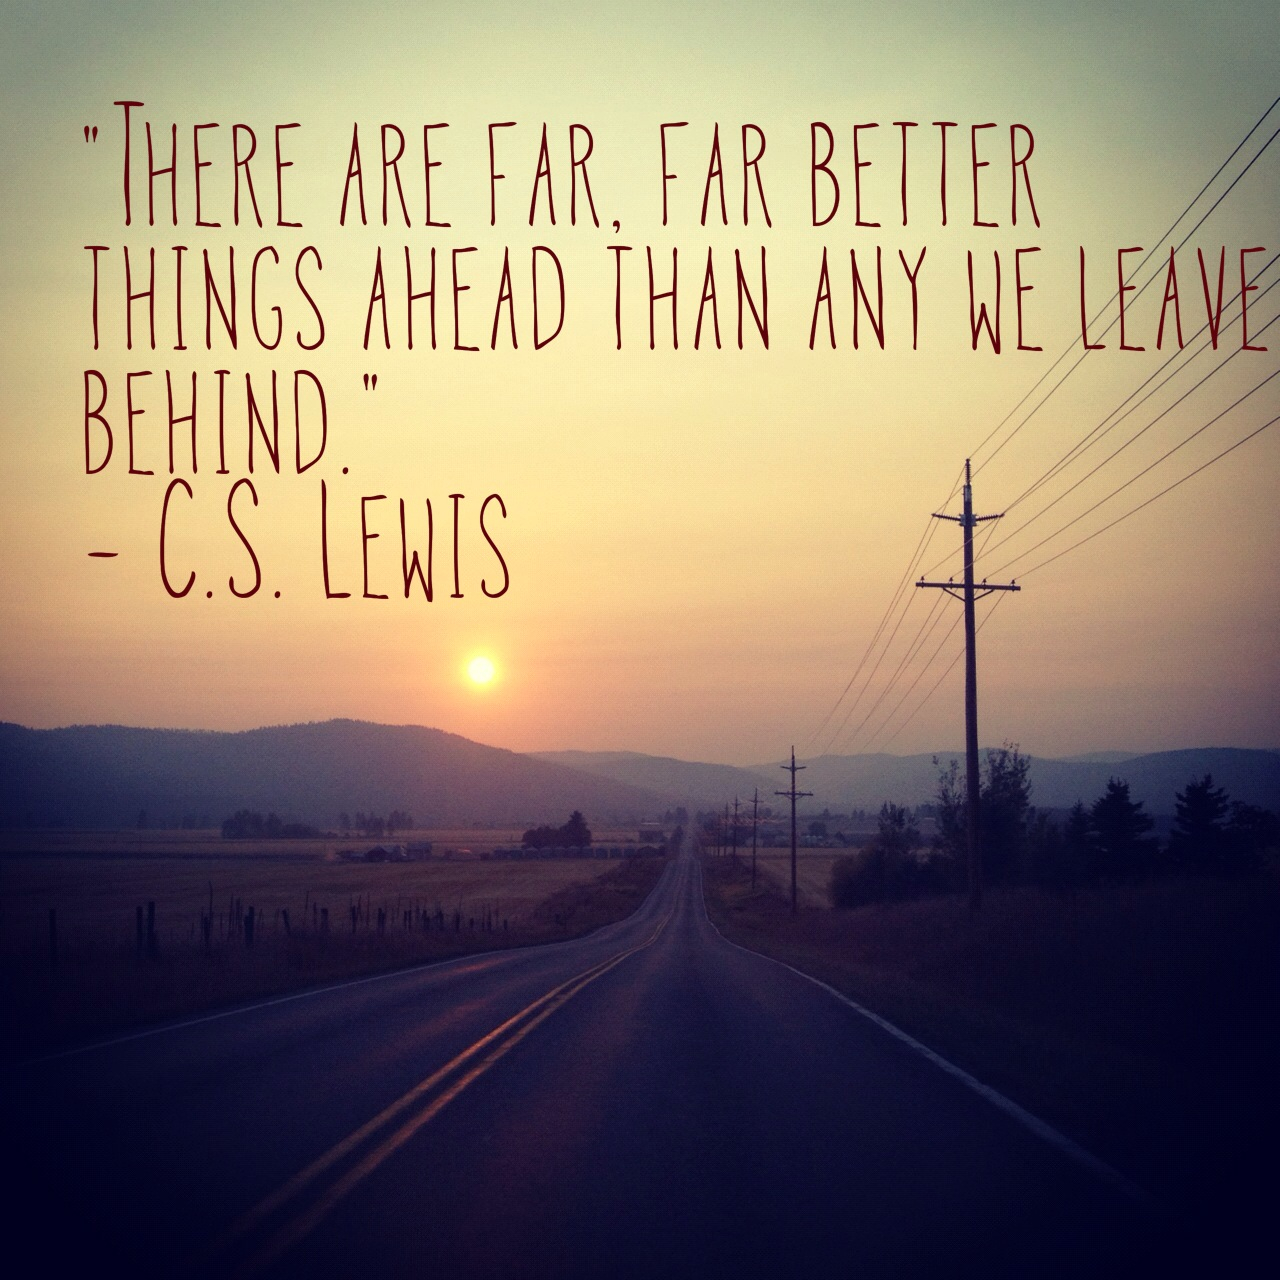 Wallpaper Thoughts Quotes Pictures And Cs Lewis